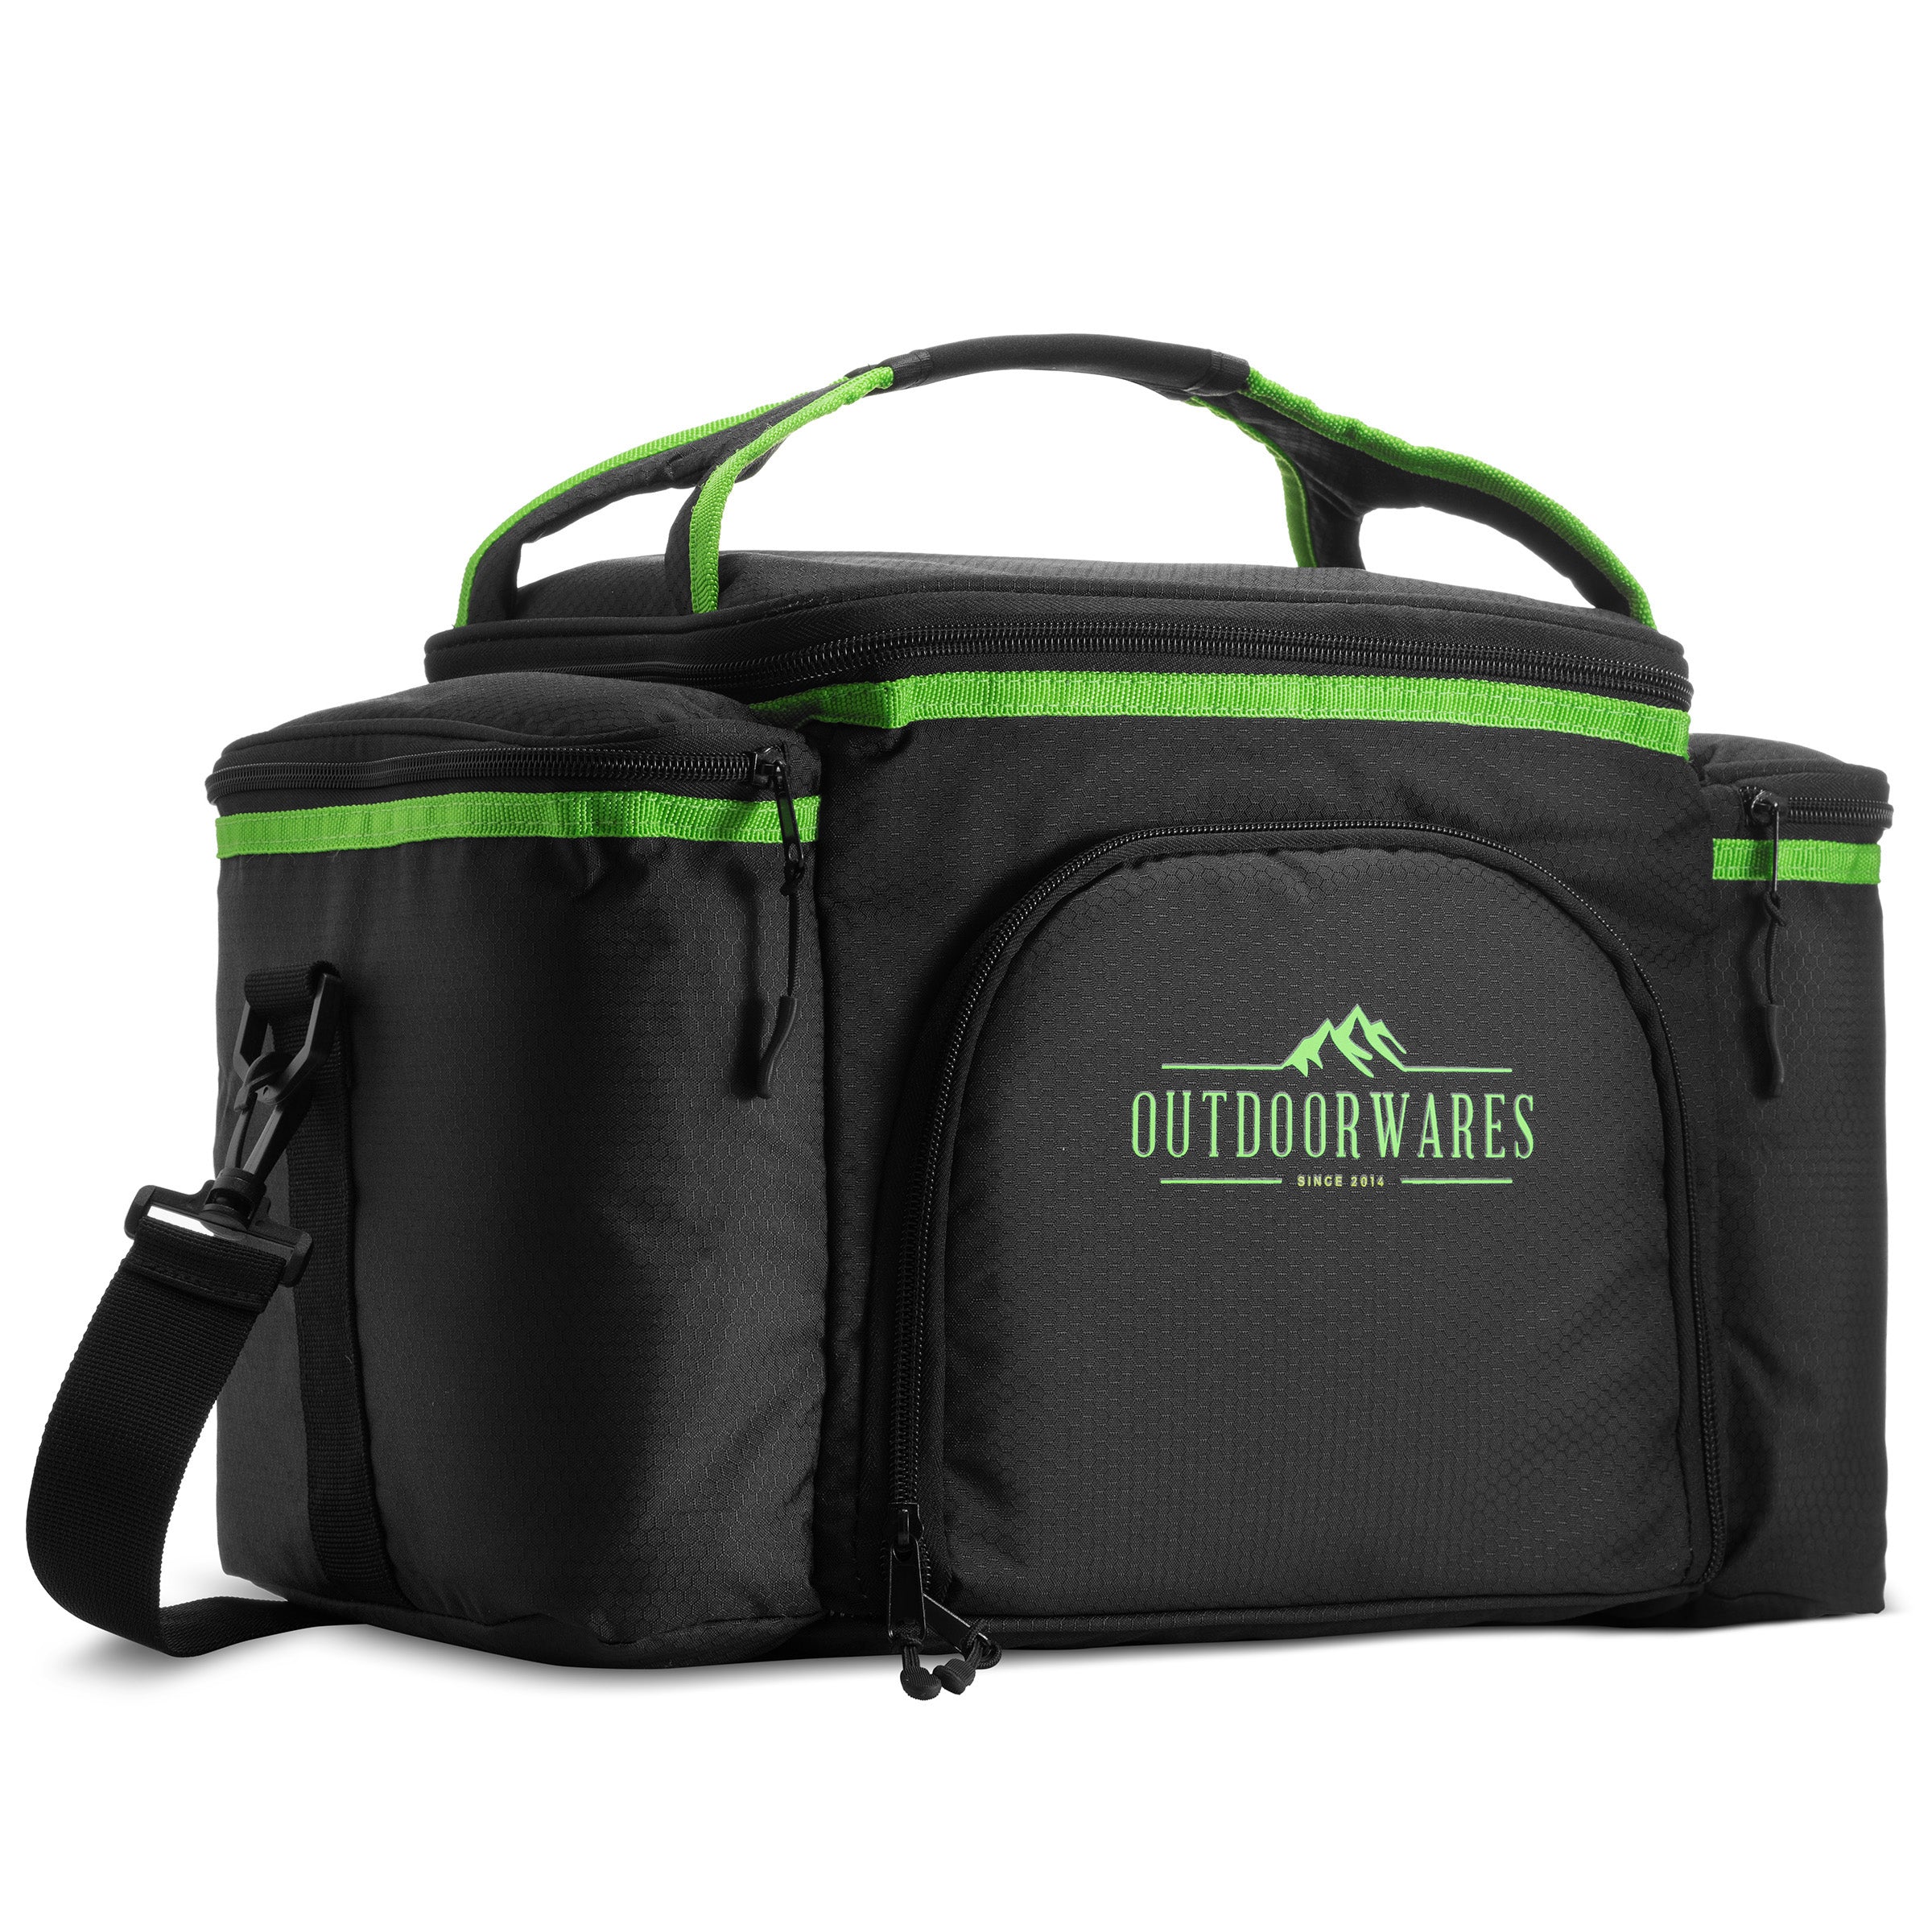 Cooler Bag Insulated By Outdoorwares Large Capacity Durable, To